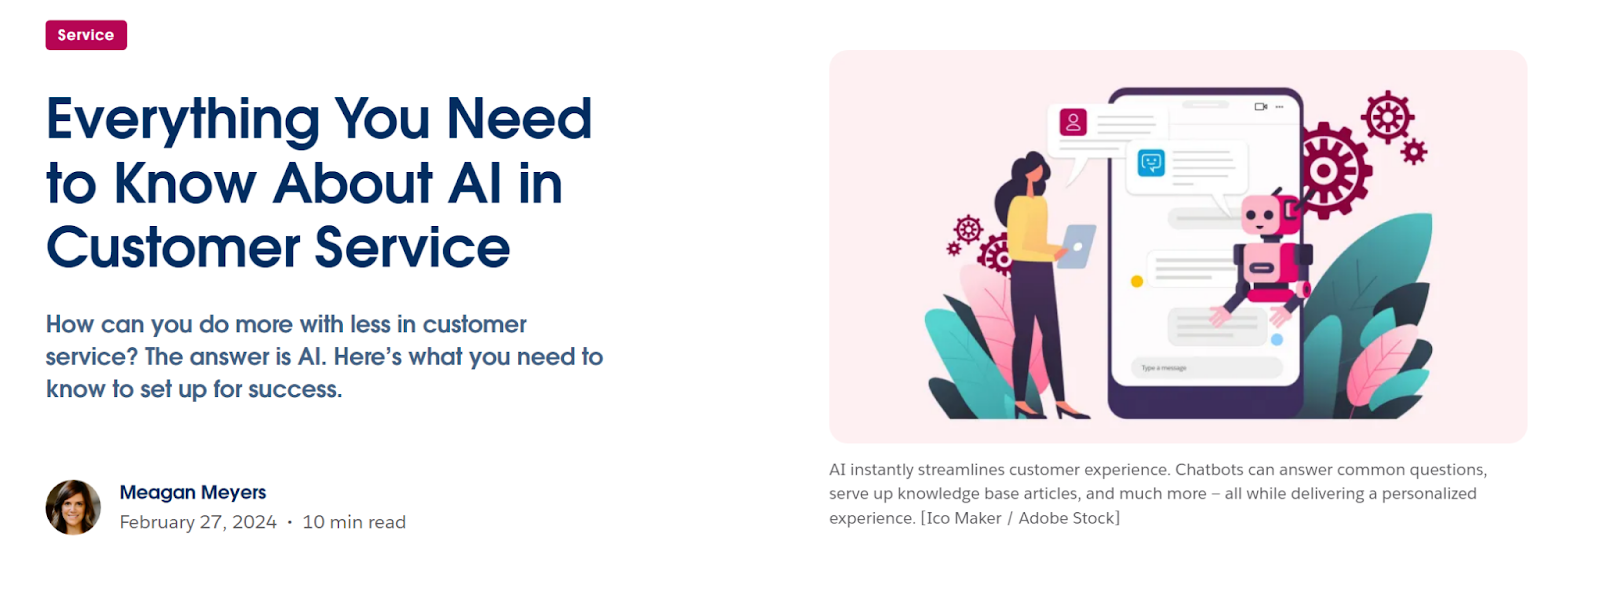 The header section of a Salesforce blog titled "Everything You Need to Know About AI in Customer Service."